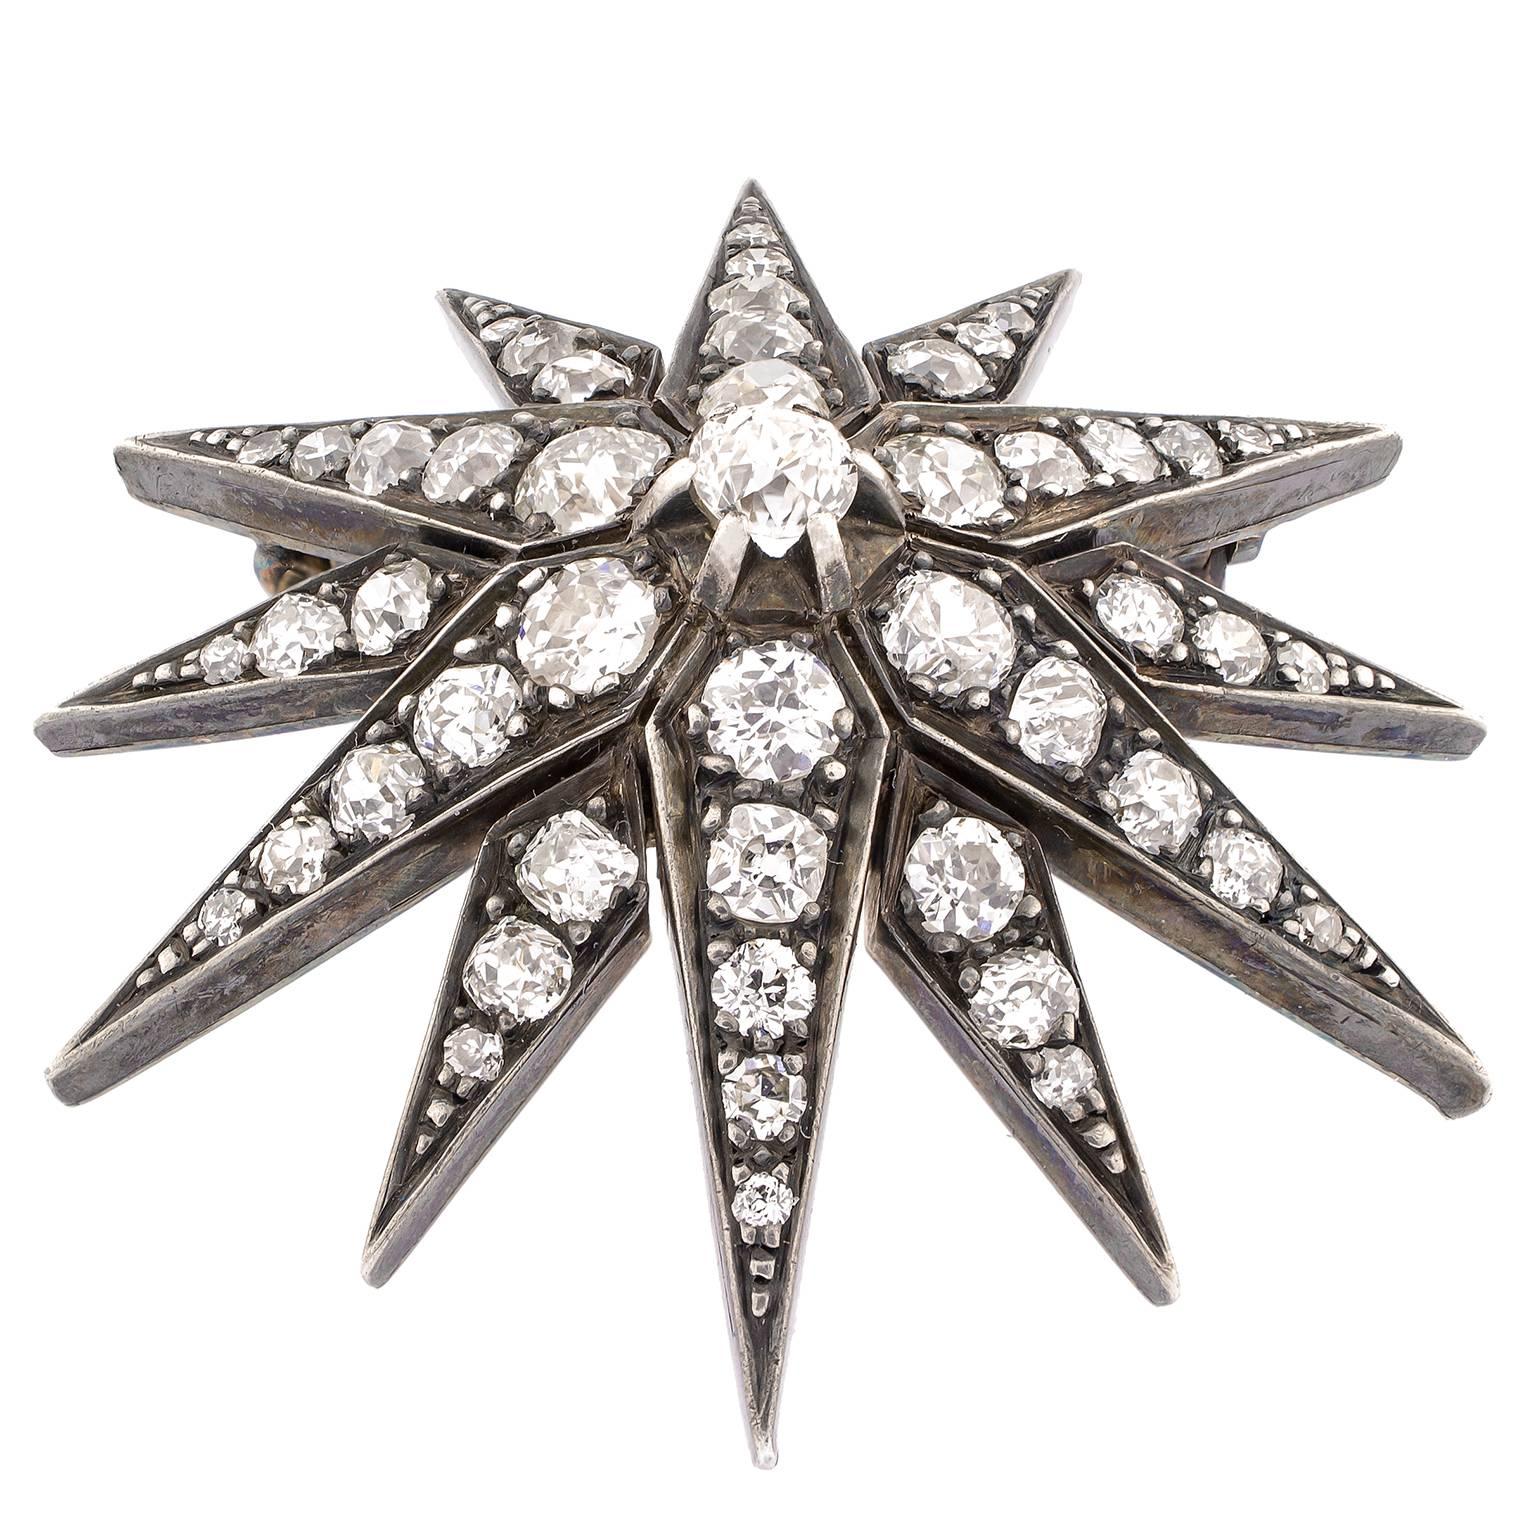 Mid 19th century brooch in silver-topped gold, with 49 single-cut diamonds, with an estimated total weight of 3.08 carats.